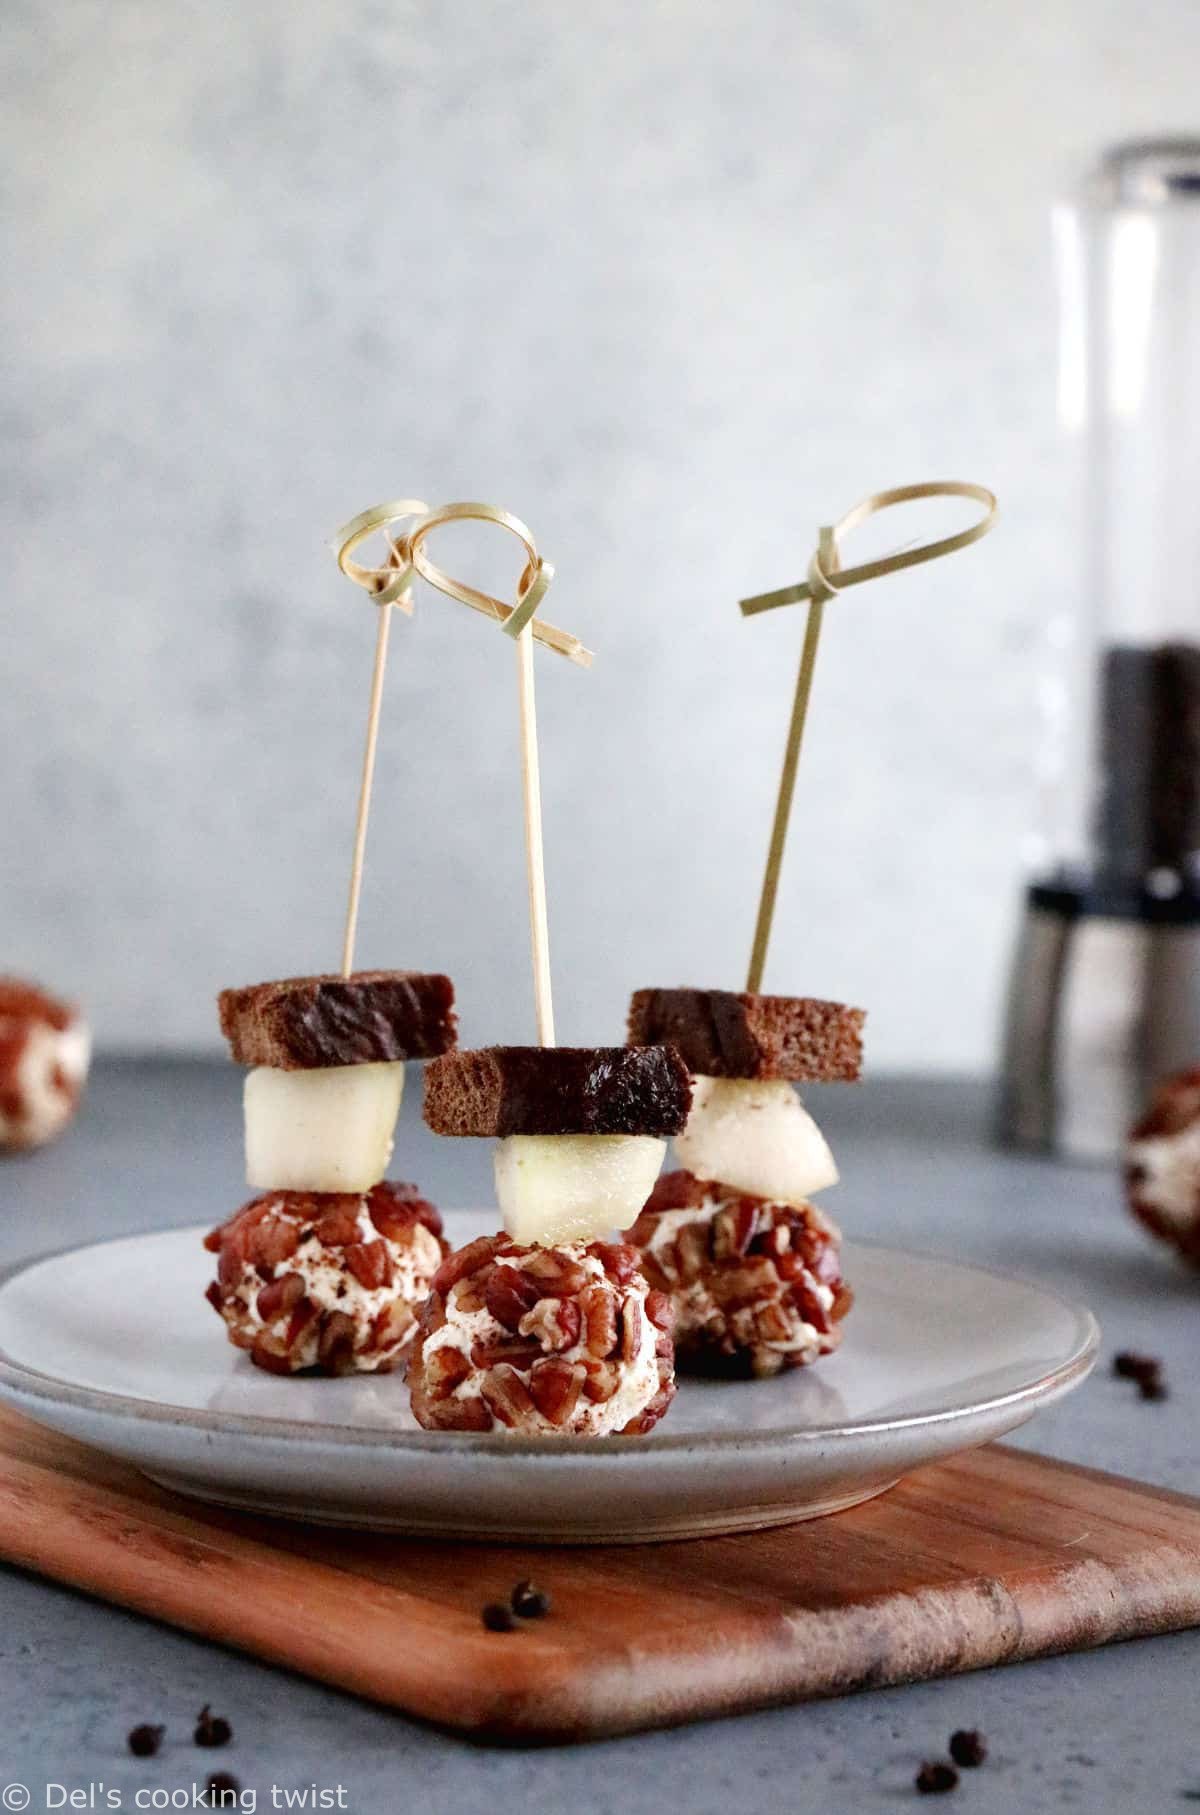 These 3 quick & easy cheese bite appetizers are festive, ready in no time and will become staples for your next cocktail party at home.